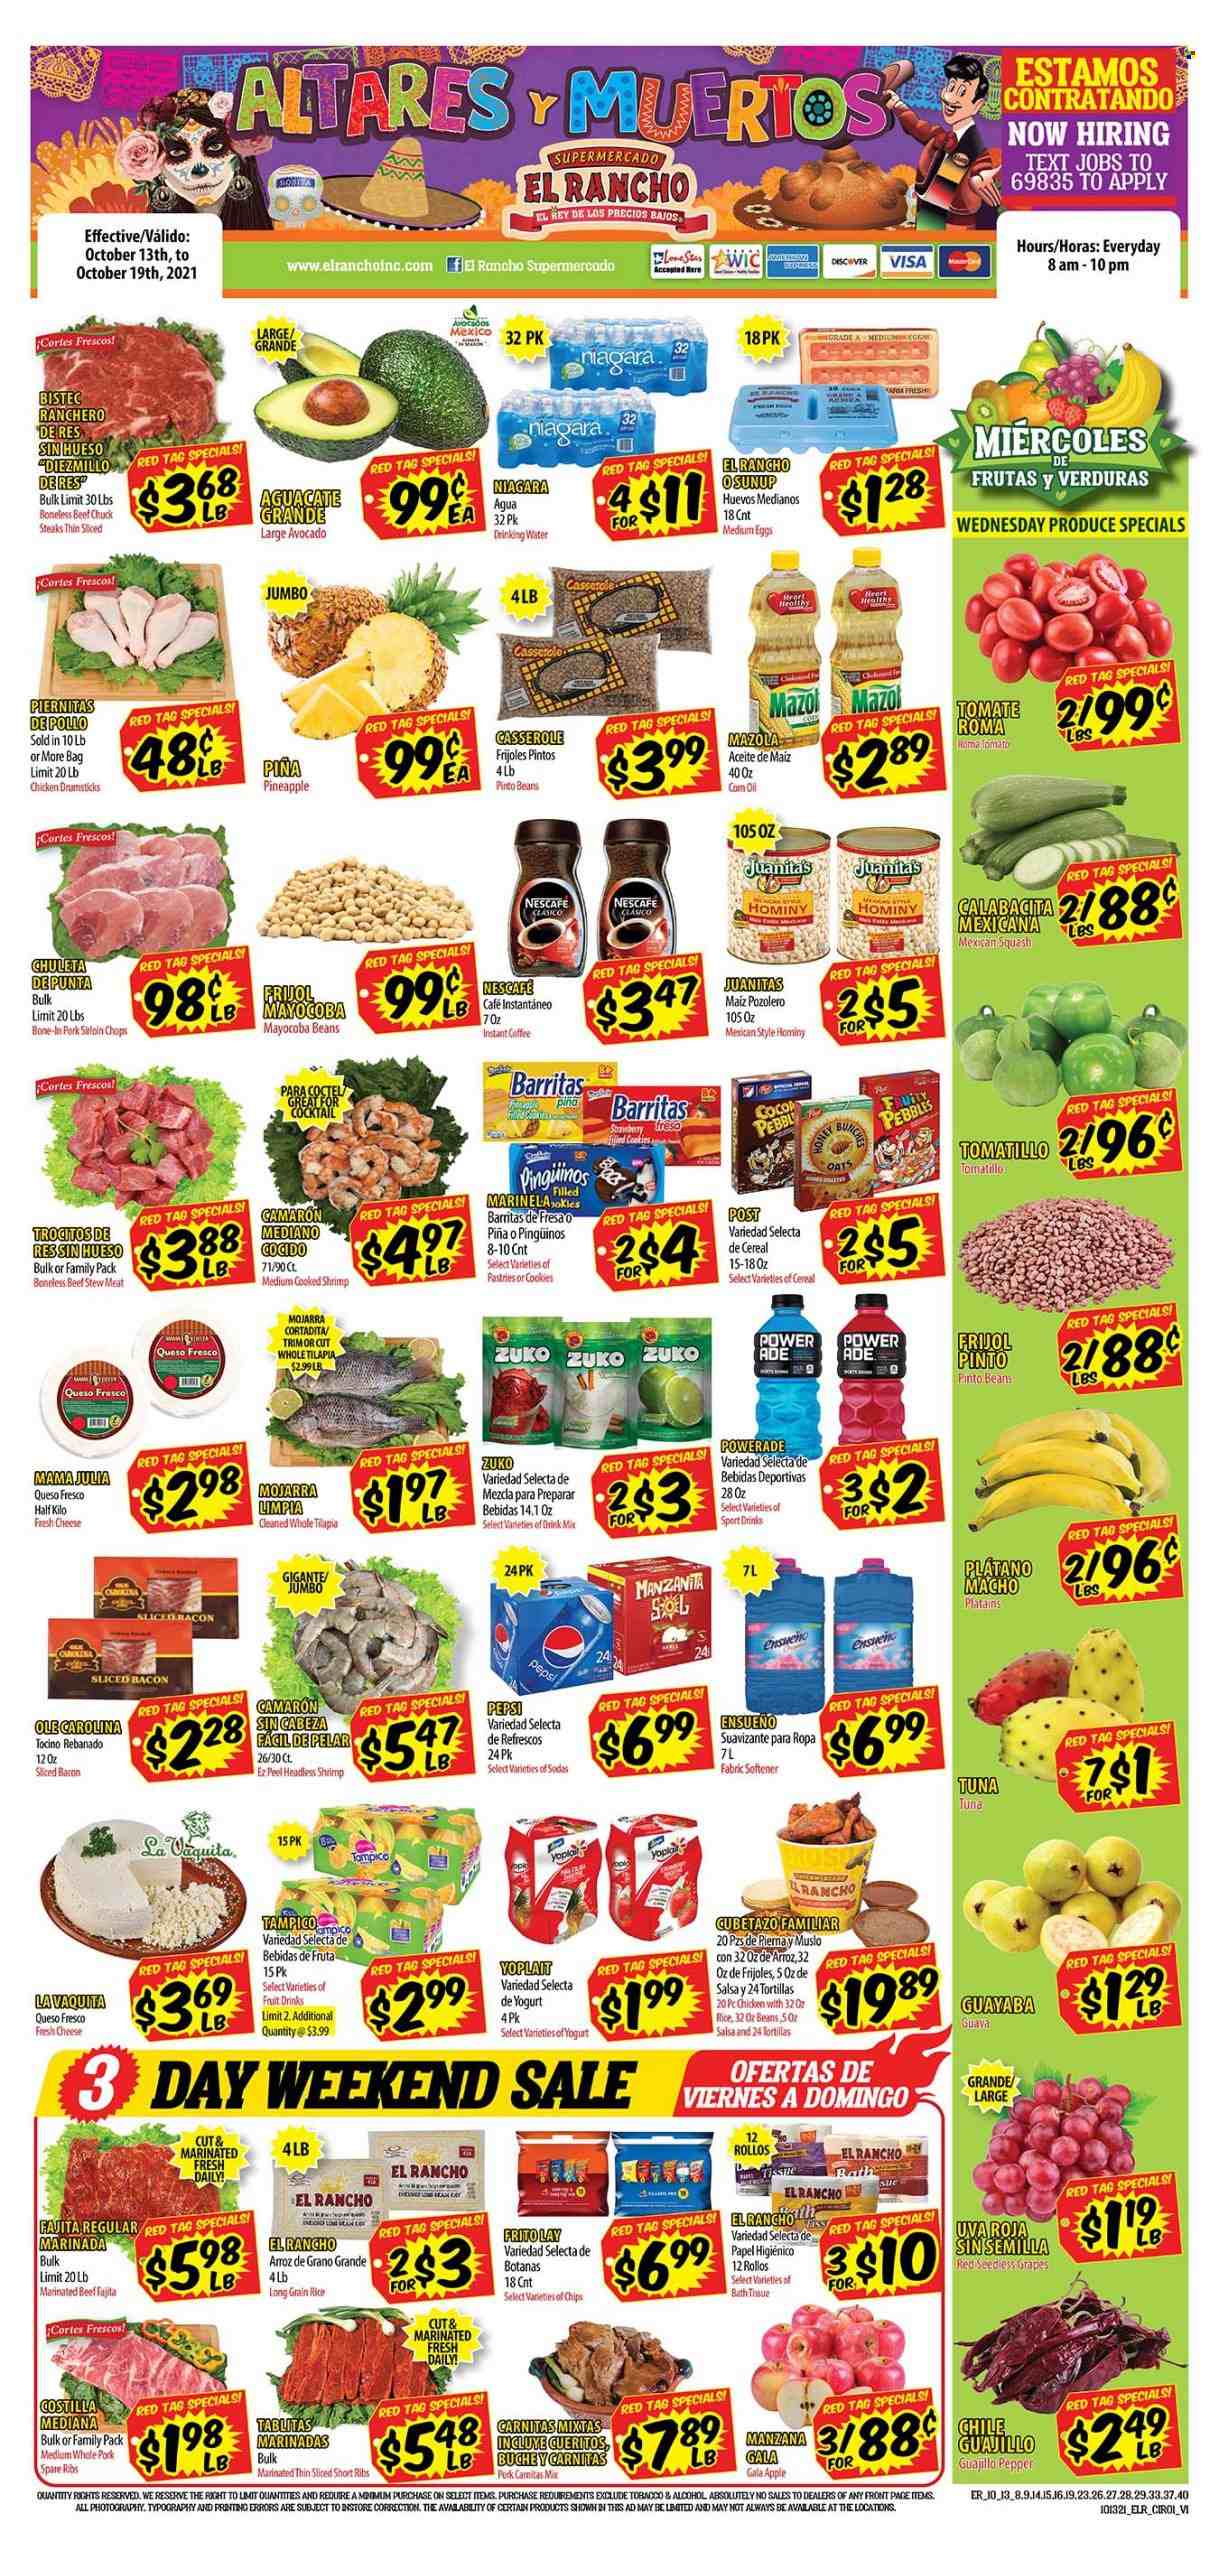 thumbnail - El Rancho Flyer - 10/13/2021 - 10/19/2021 - Sales products - stew meat, seedless grapes, tortillas, tomatillo, tomatoes, mexican squash, avocado, Gala, grapes, guava, pineapple, tilapia, tuna, shrimps, fajita, bacon, queso fresco, cheese, yoghurt, Yoplait, eggs, cookies, chips, pinto beans, cereals, long grain rice, salsa, oil, Powerade, Pepsi, fruit punch, instant coffee, Nescafé, alcohol, chicken drumsticks, steak, marinated beef, pork loin, pork meat, pork ribs, pork spare ribs. Page 1.